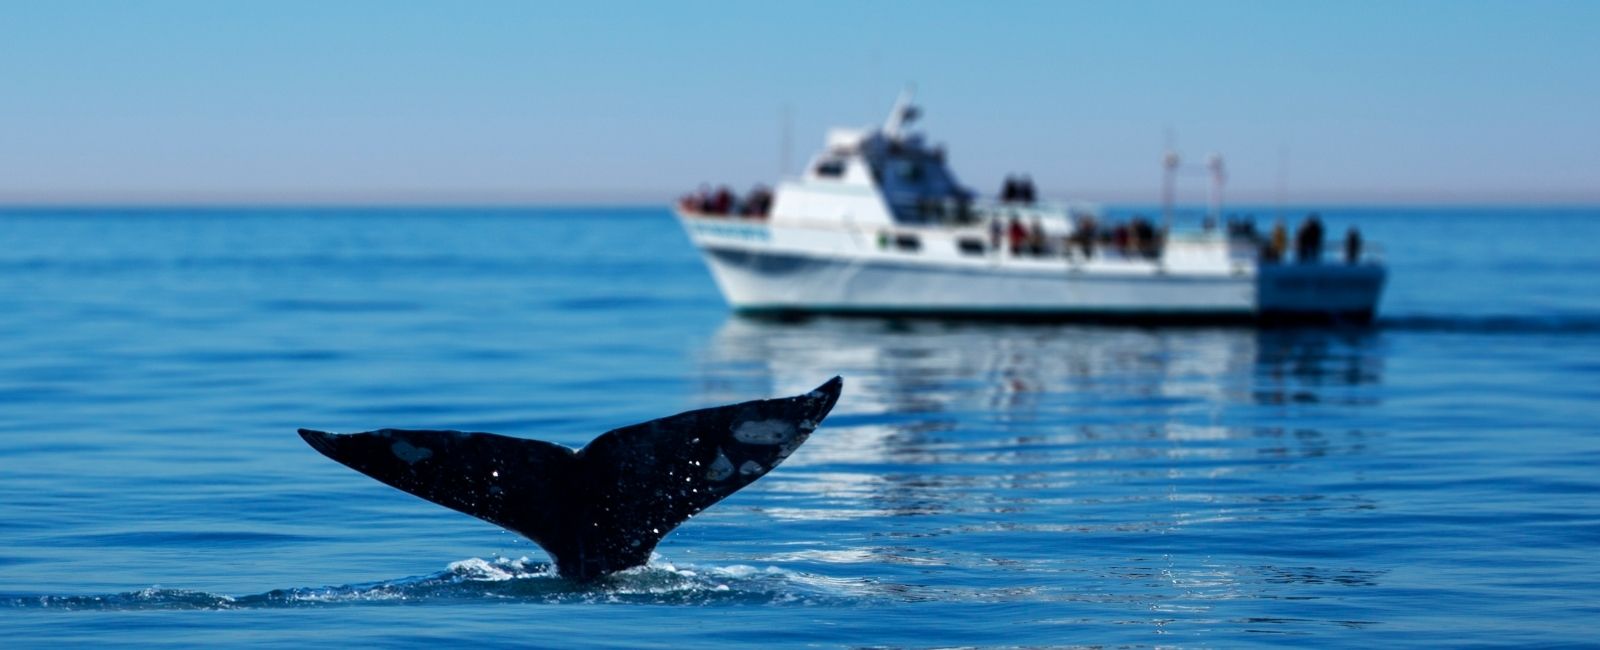 whale tail above the water in blue waters with a tour boat full of observers in the background